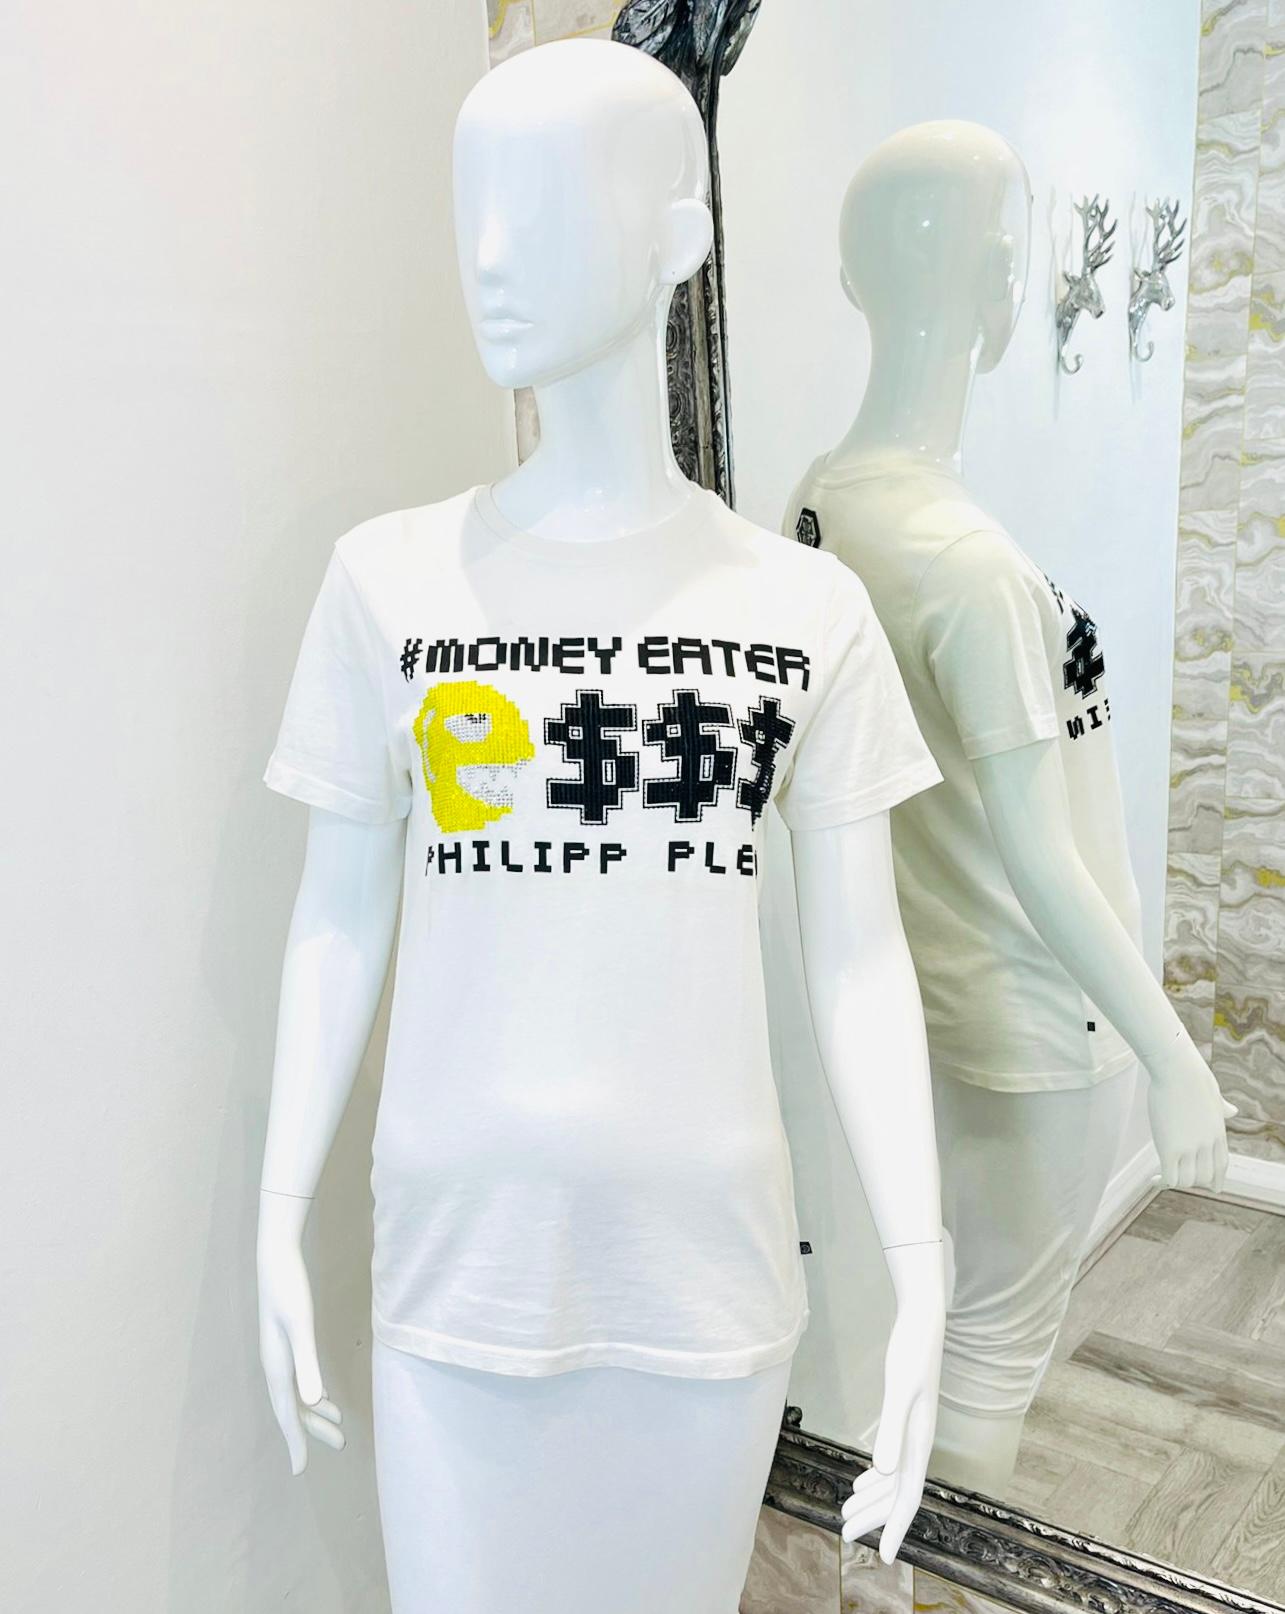 Philipp Plein Cotton Crystal Logo T-Shirt

White T-Shirt designed with 'Money Eater' crystal embellished logo.

Featuring classic fit, crew neckline and short sleeves.

Size – S (Label missing but corresponds)

Condition – Very Good

Composition –